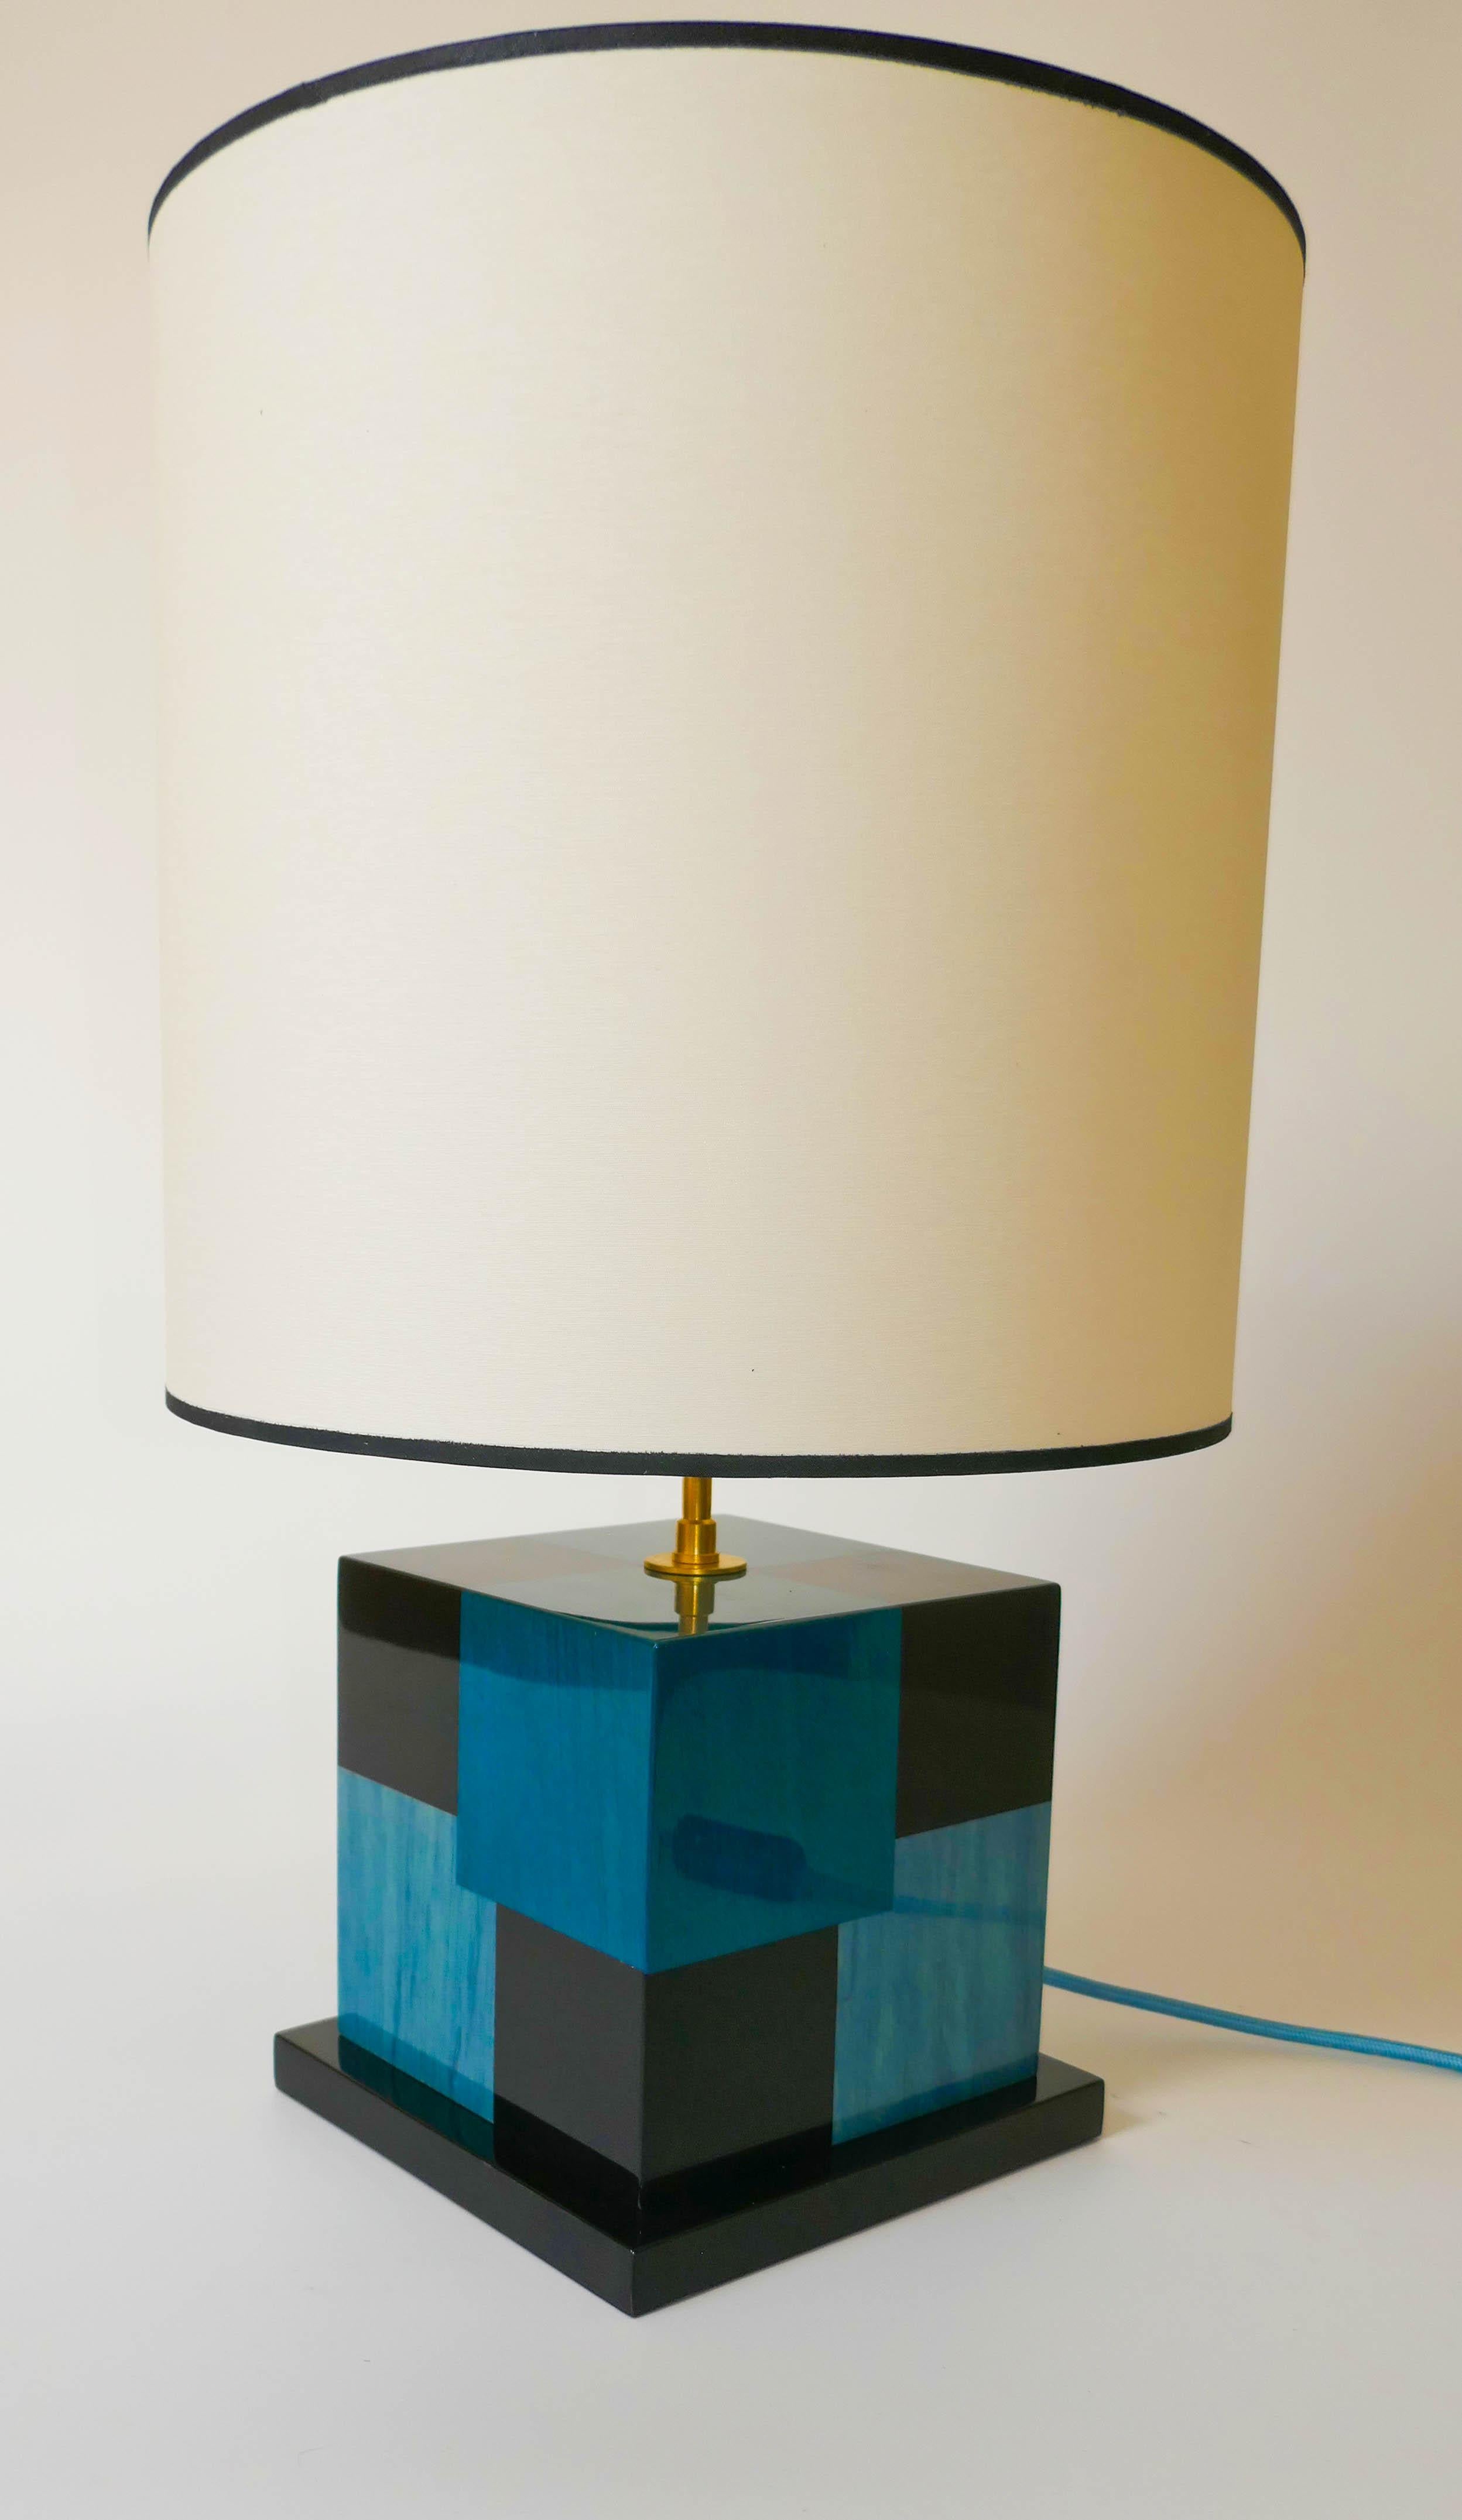 Table lamp in tinted black, light and dark blue sycamore marquetry.
Carefully build in our Parisian workshop this lamp has a kinetic effect using the different colors to create an impression of deepness. The lamp is varnished. The bulb is a standard